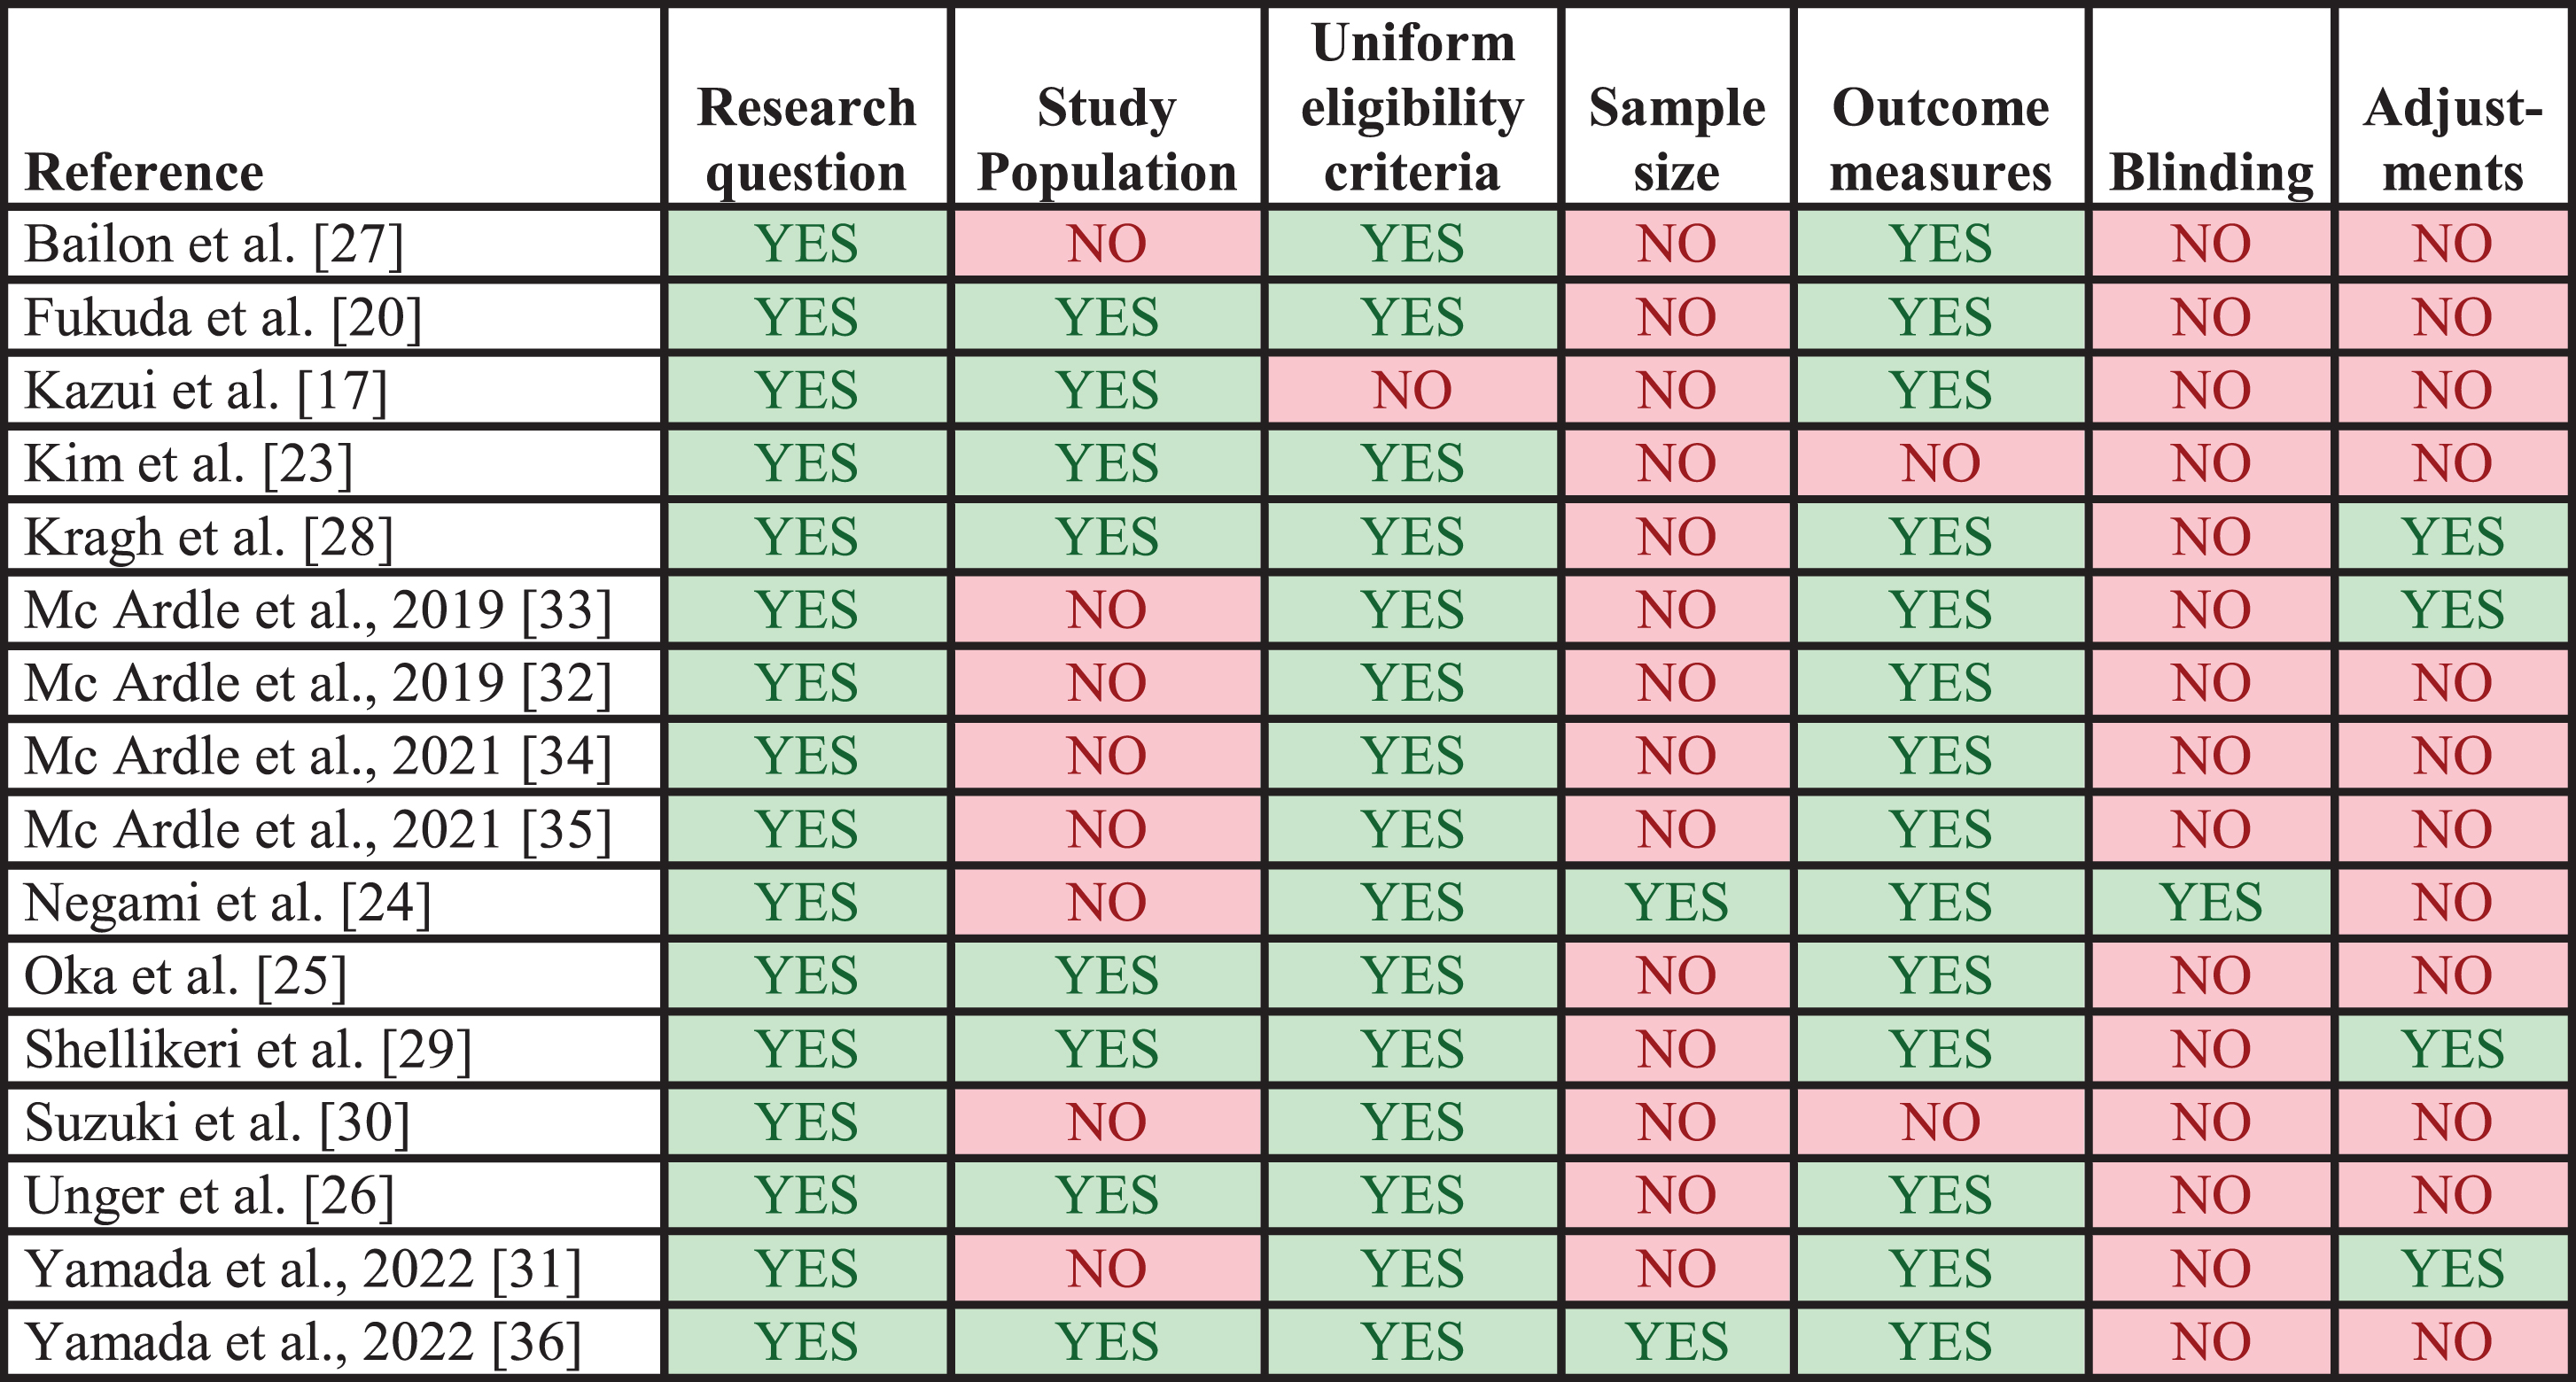 Quality assessments of included studies. Results from application of the modified check list for assessment of study methodology. Each column represents a criterion from the check list. Studies marked with YES did meet the criterion, whereas studies marked with NO did not. The applied check list is available in the Supplementary Material.